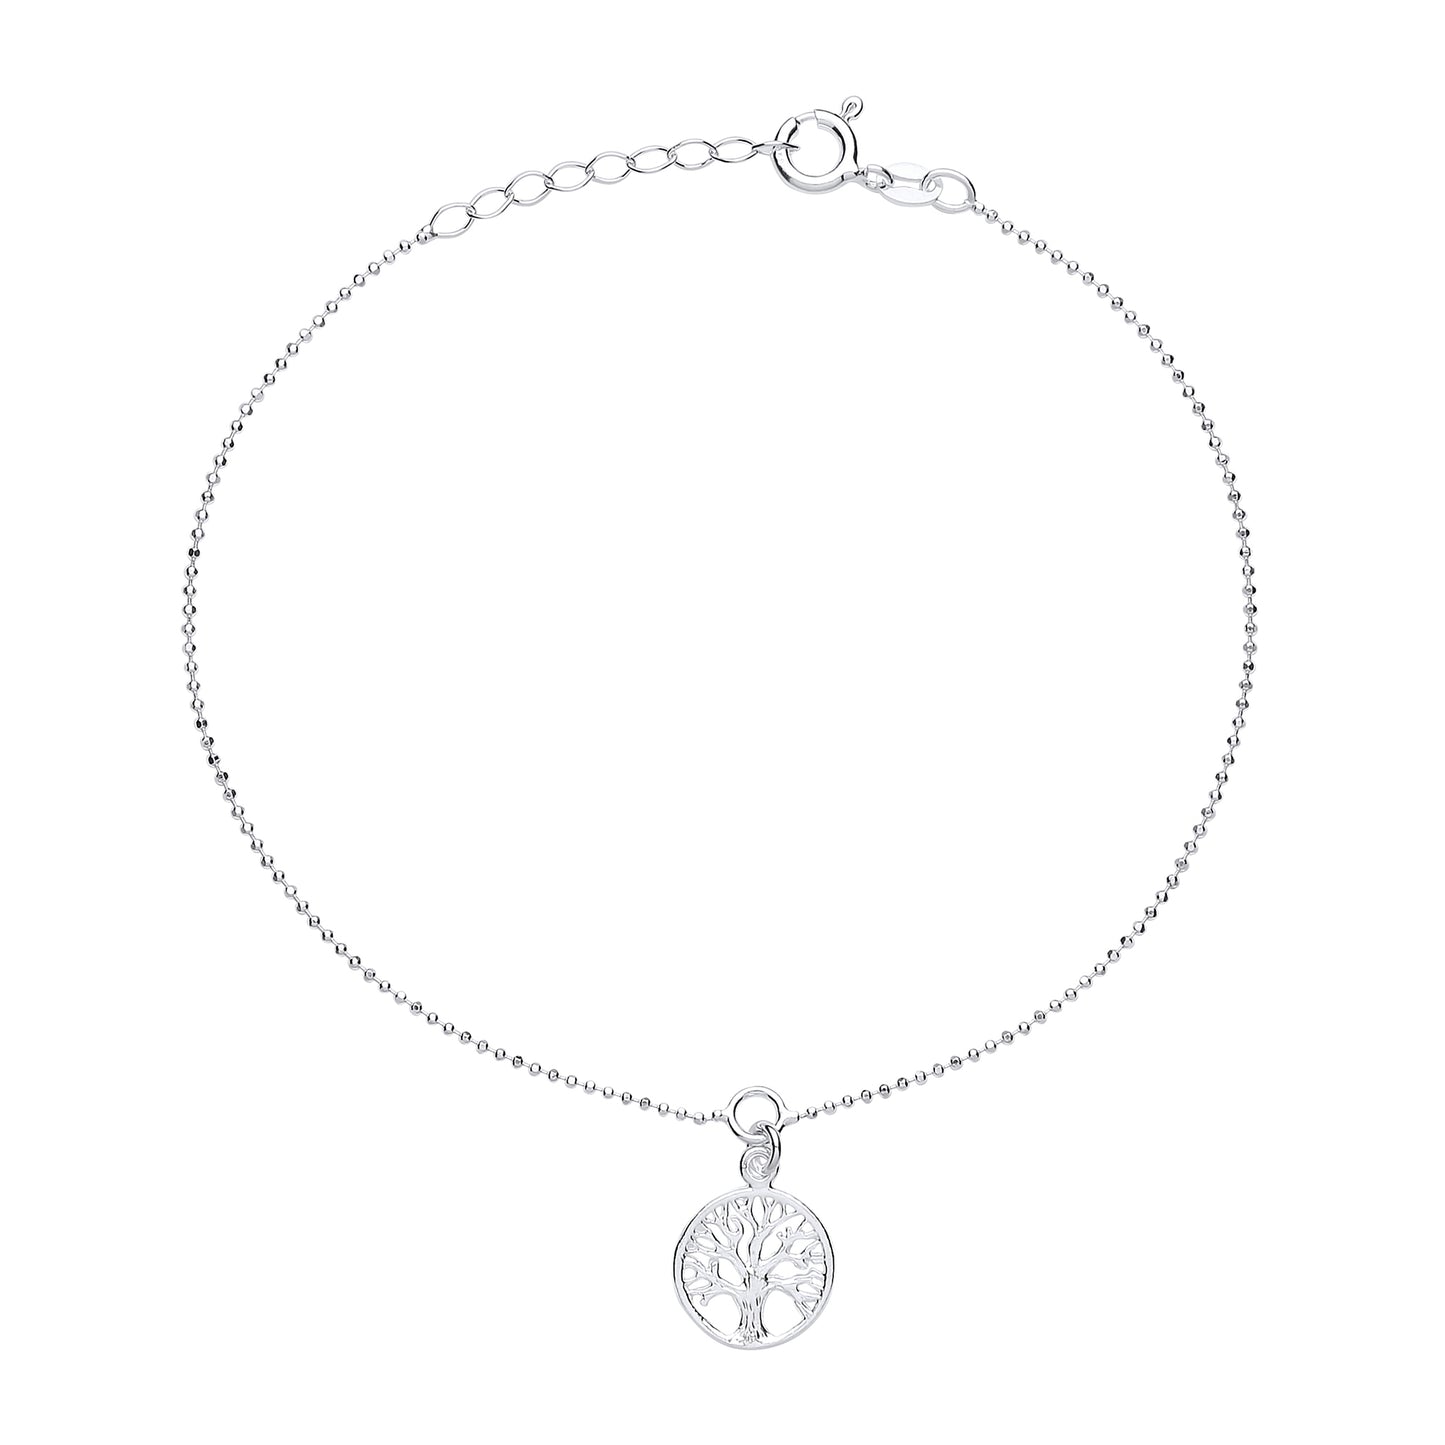 Silver  Bead Chain Tree of Life Charm Anklet 13mm 9 + 1 inch - ANK004